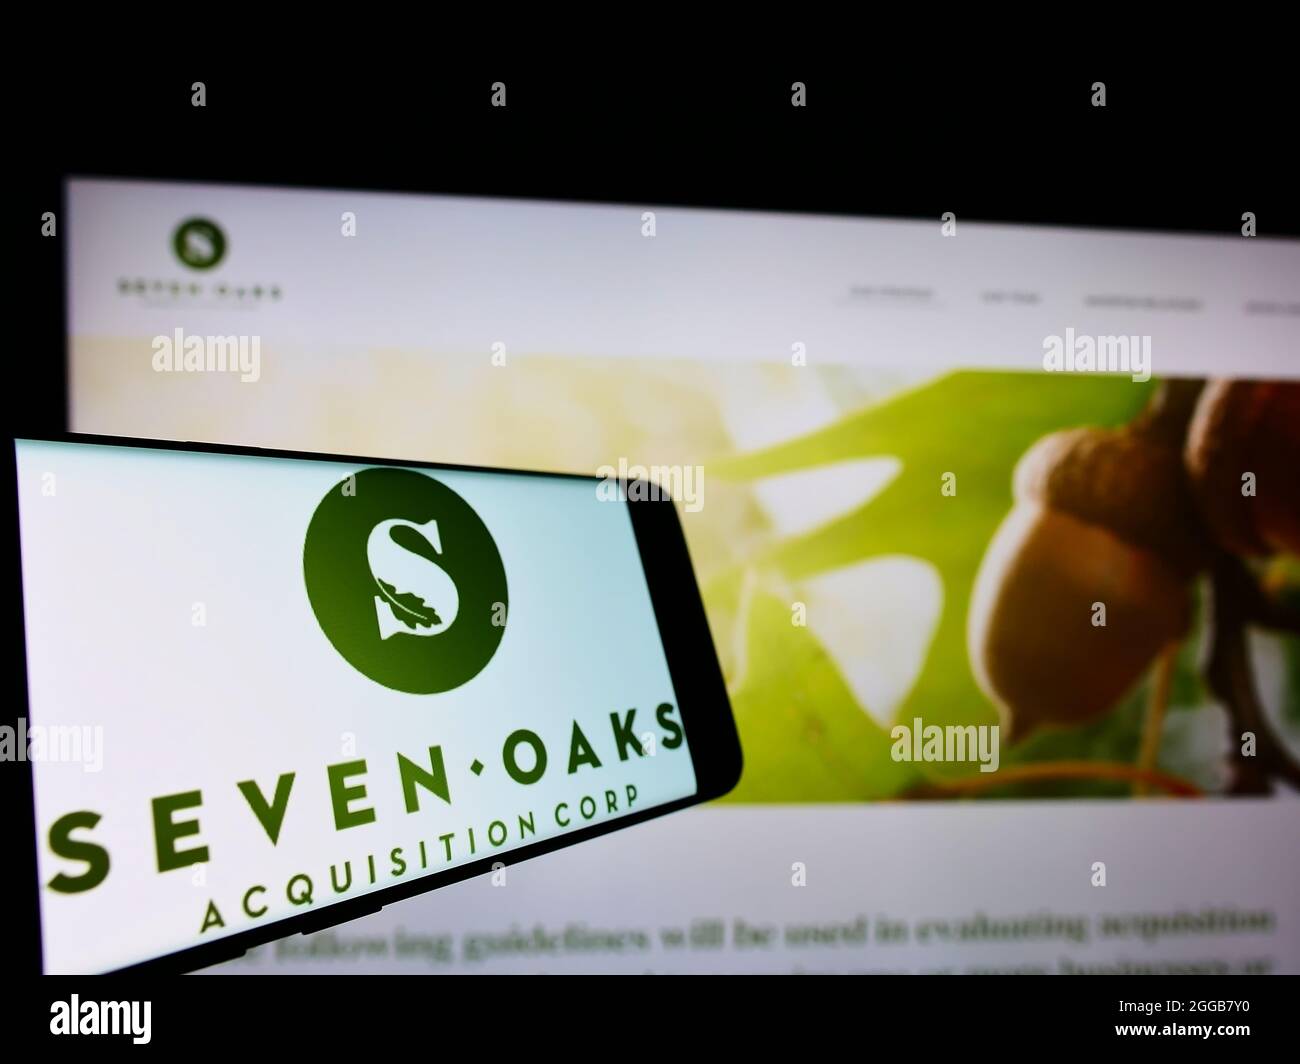 Smartphone with logo of American company Seven Oaks Acquisition Corp. on screen in front of business website. Focus on center of phone display. Stock Photo